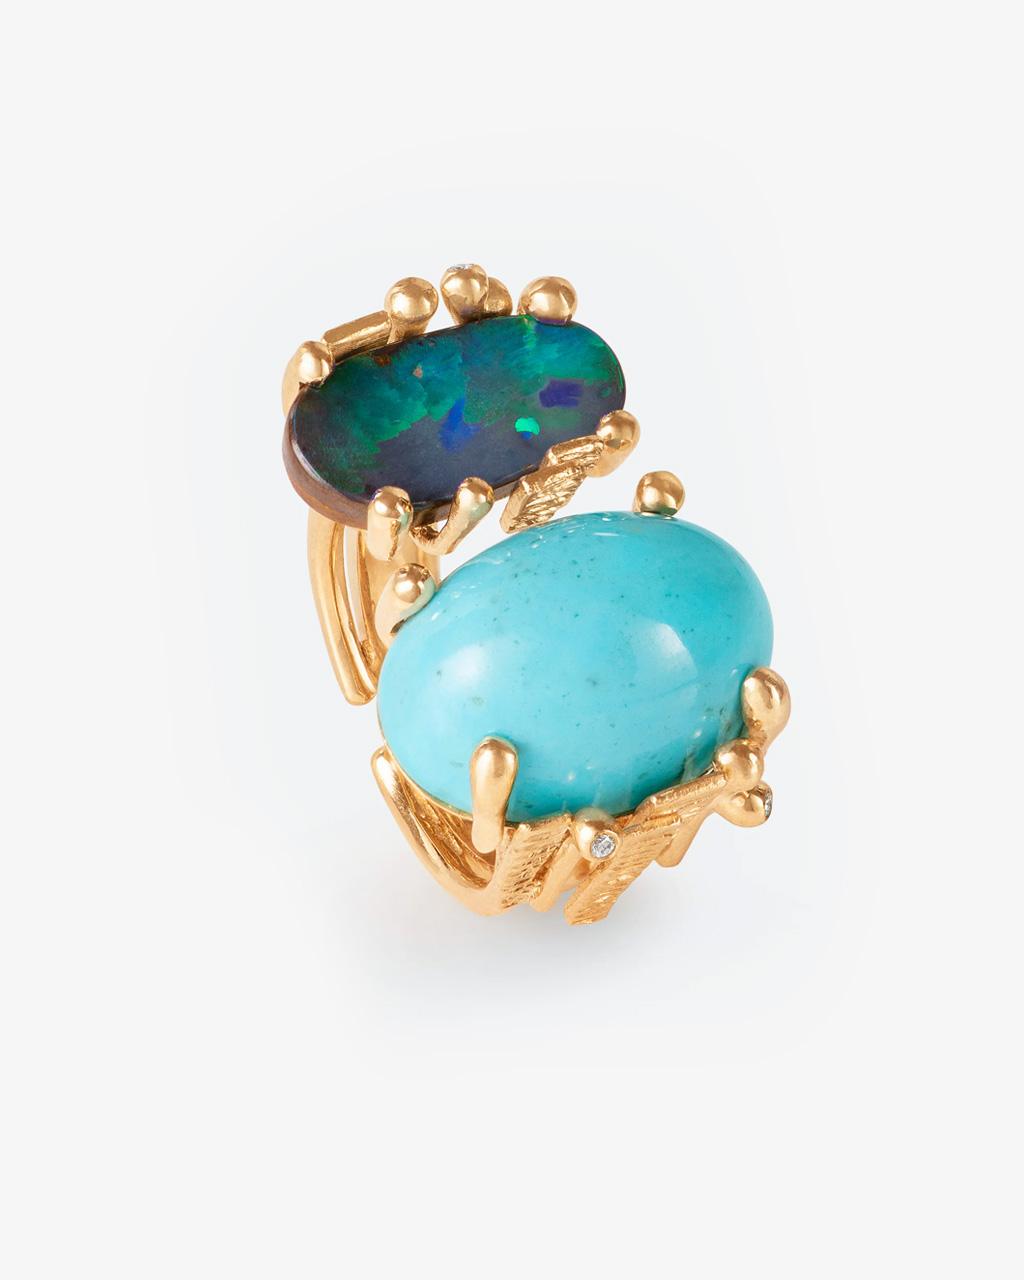 Ole Lynggaard 'BoHo' Ring with Turquoise, Opal and Diamonds